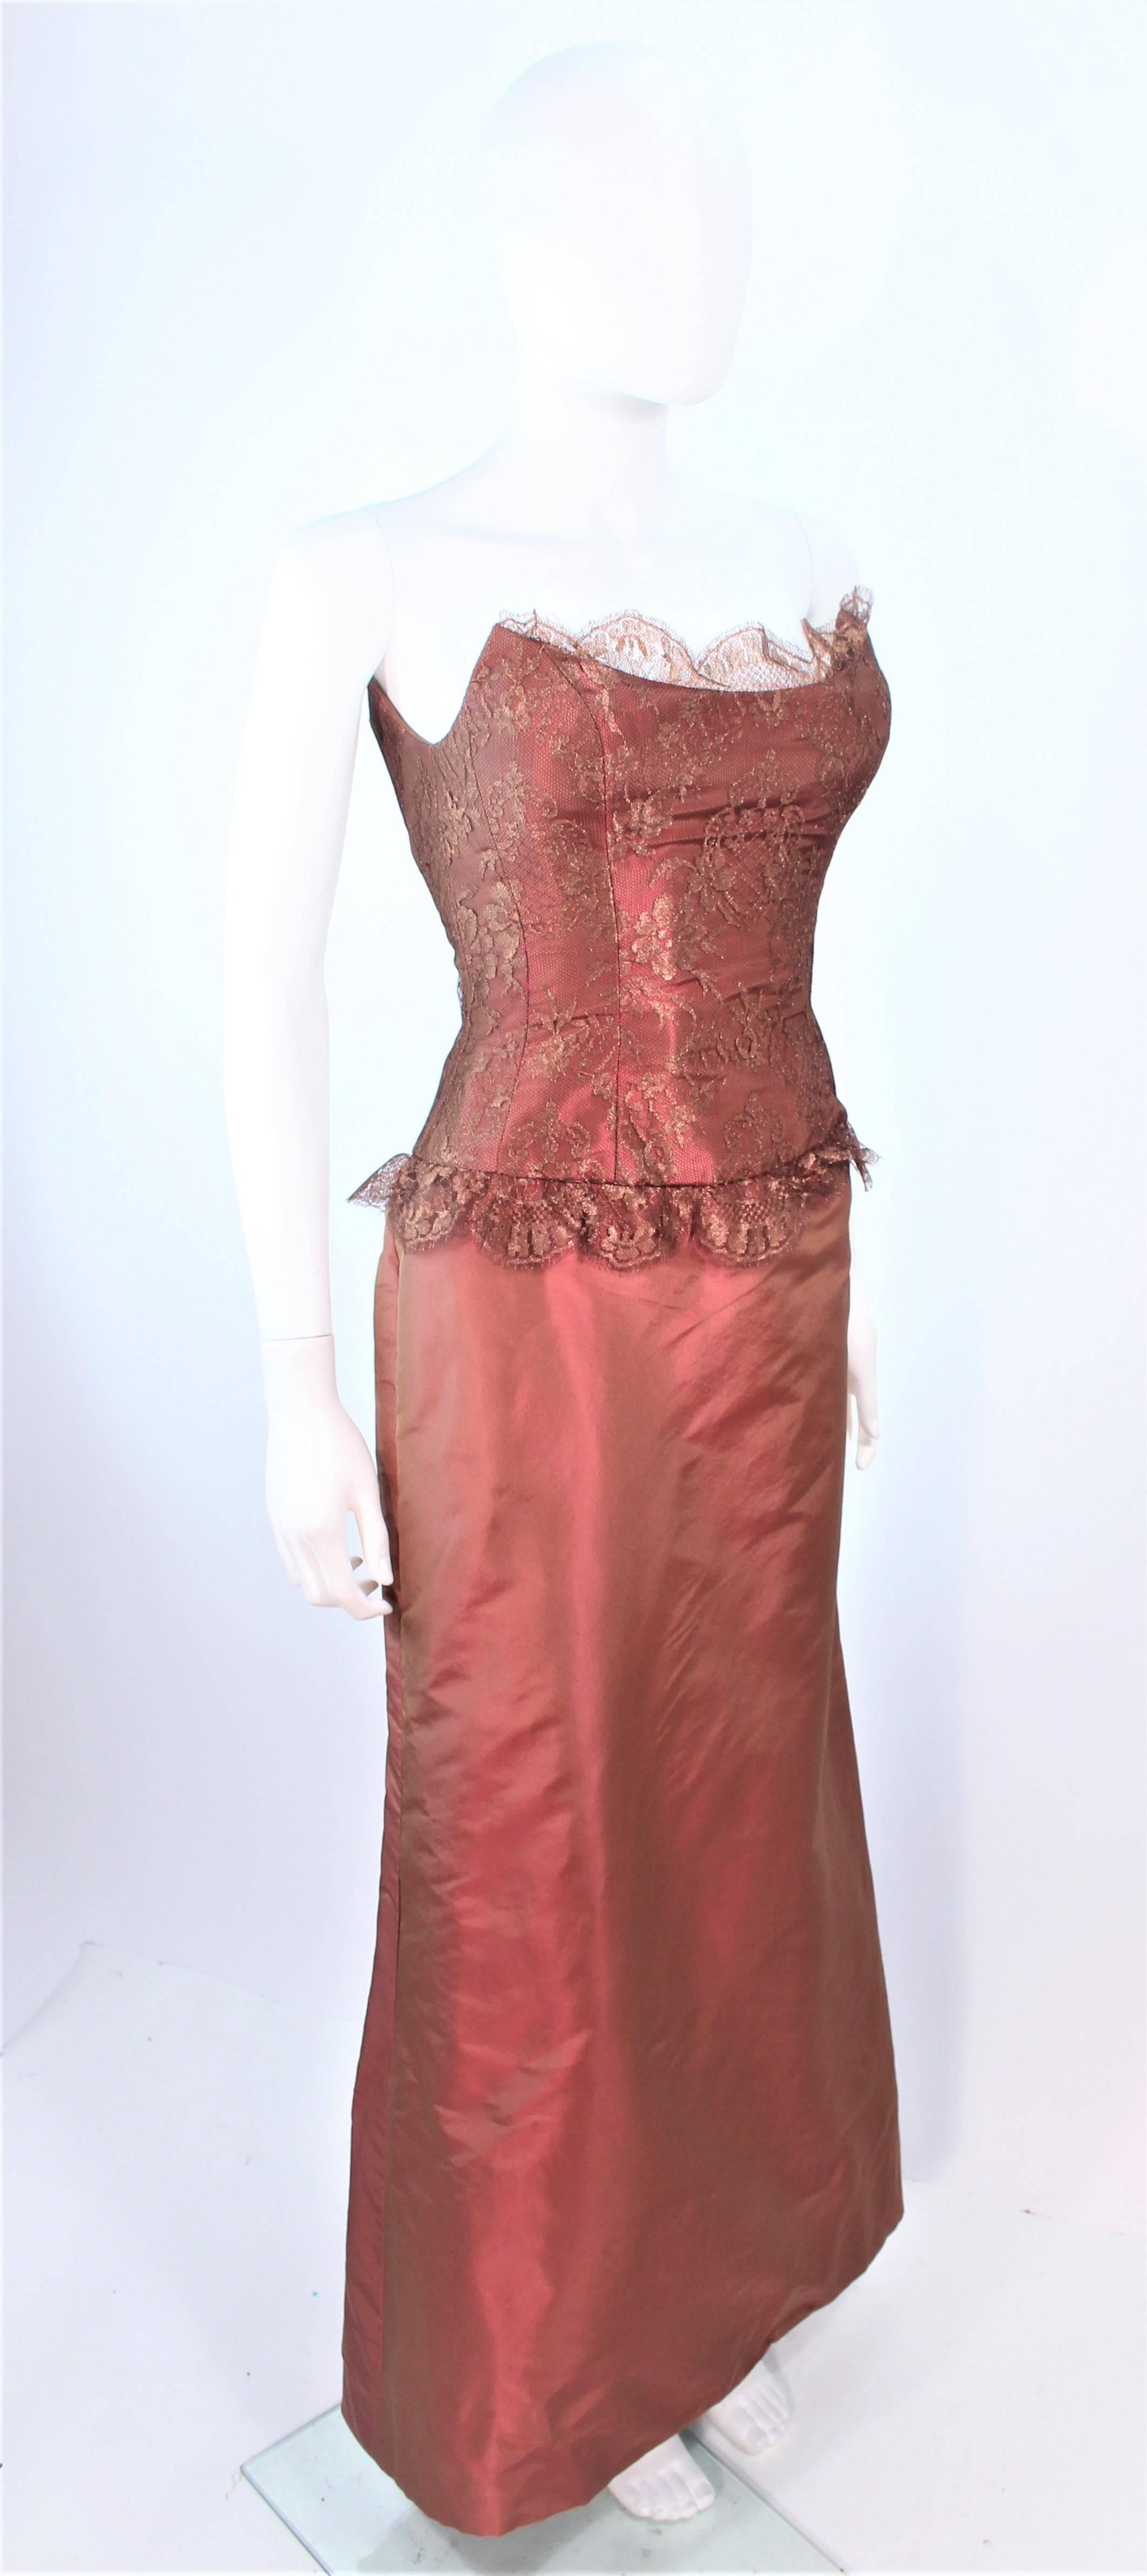 ELIZABETH FILLMORE Bronze Lace & Satin Evening Gown Ensemble with Coat Size 10 In Excellent Condition For Sale In Los Angeles, CA